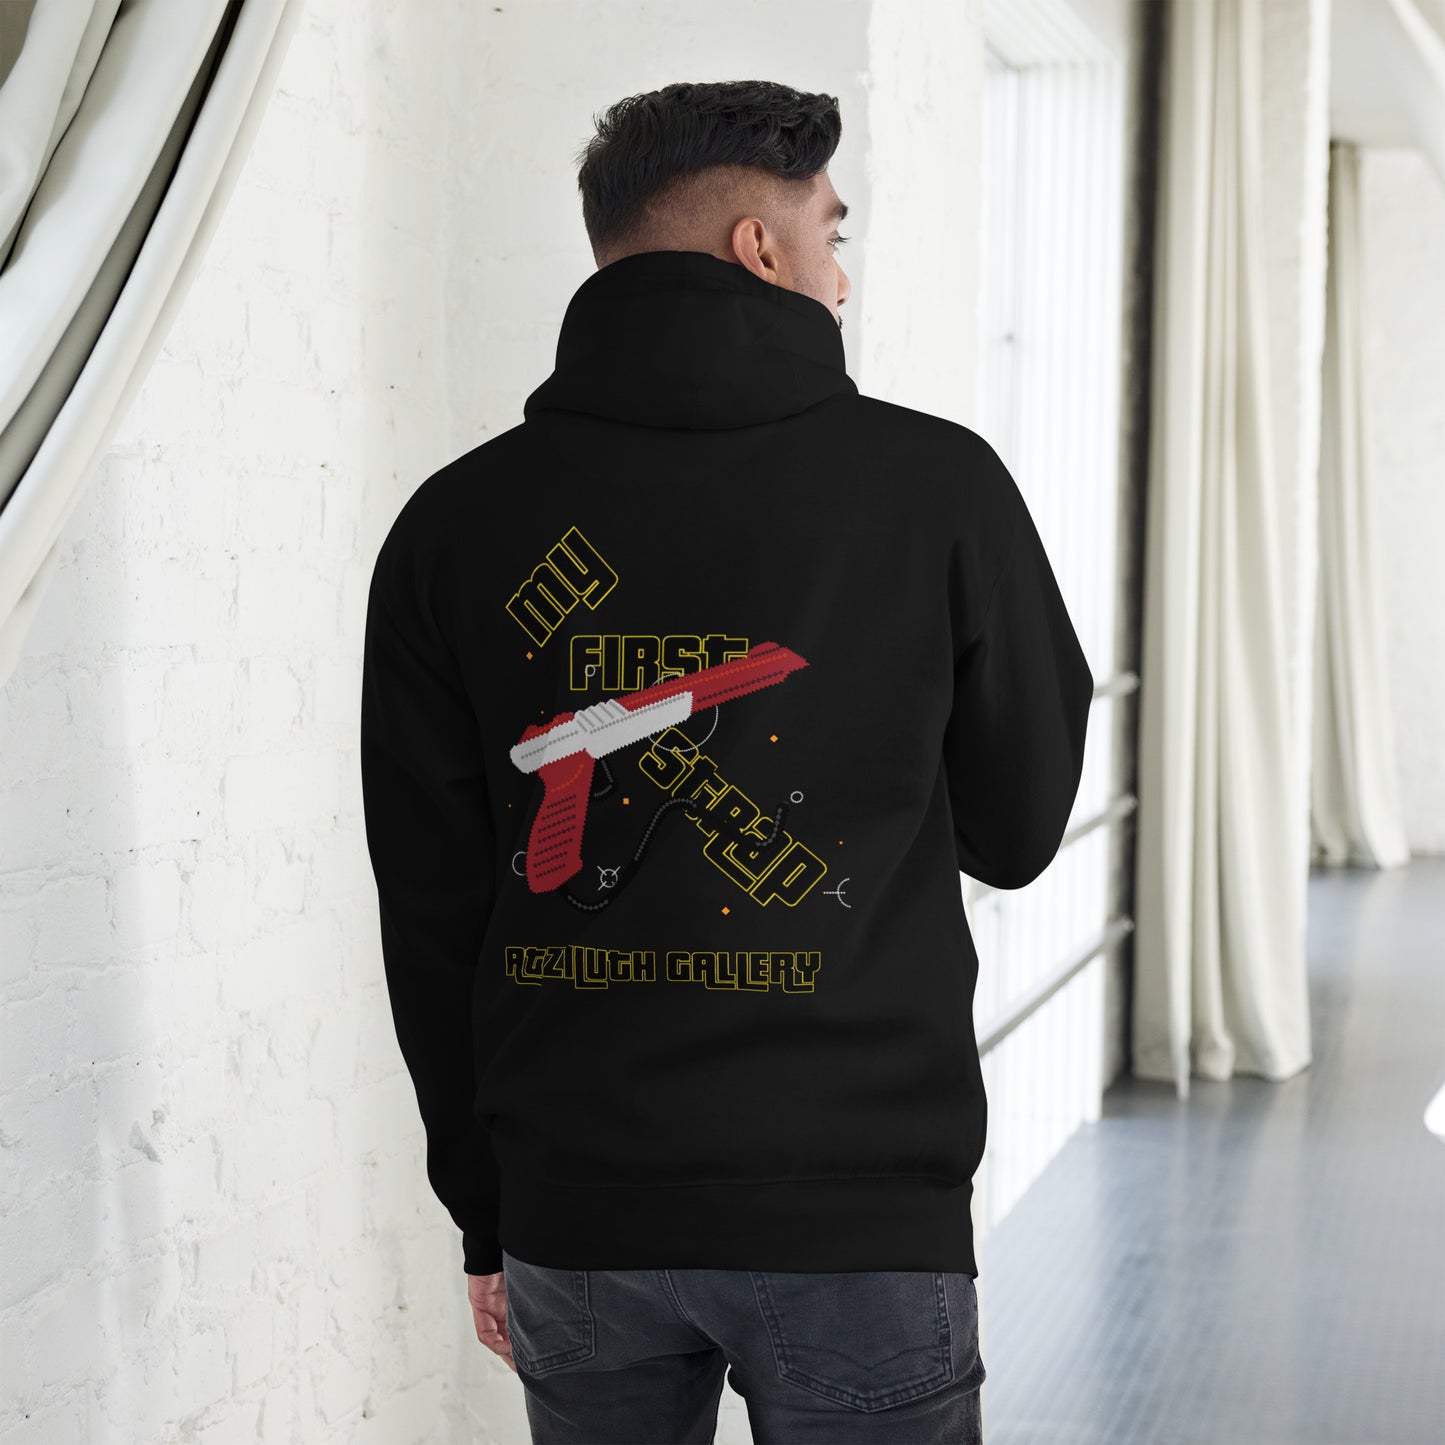 Atziluth Gallery "My 1st Strap" Hoodie